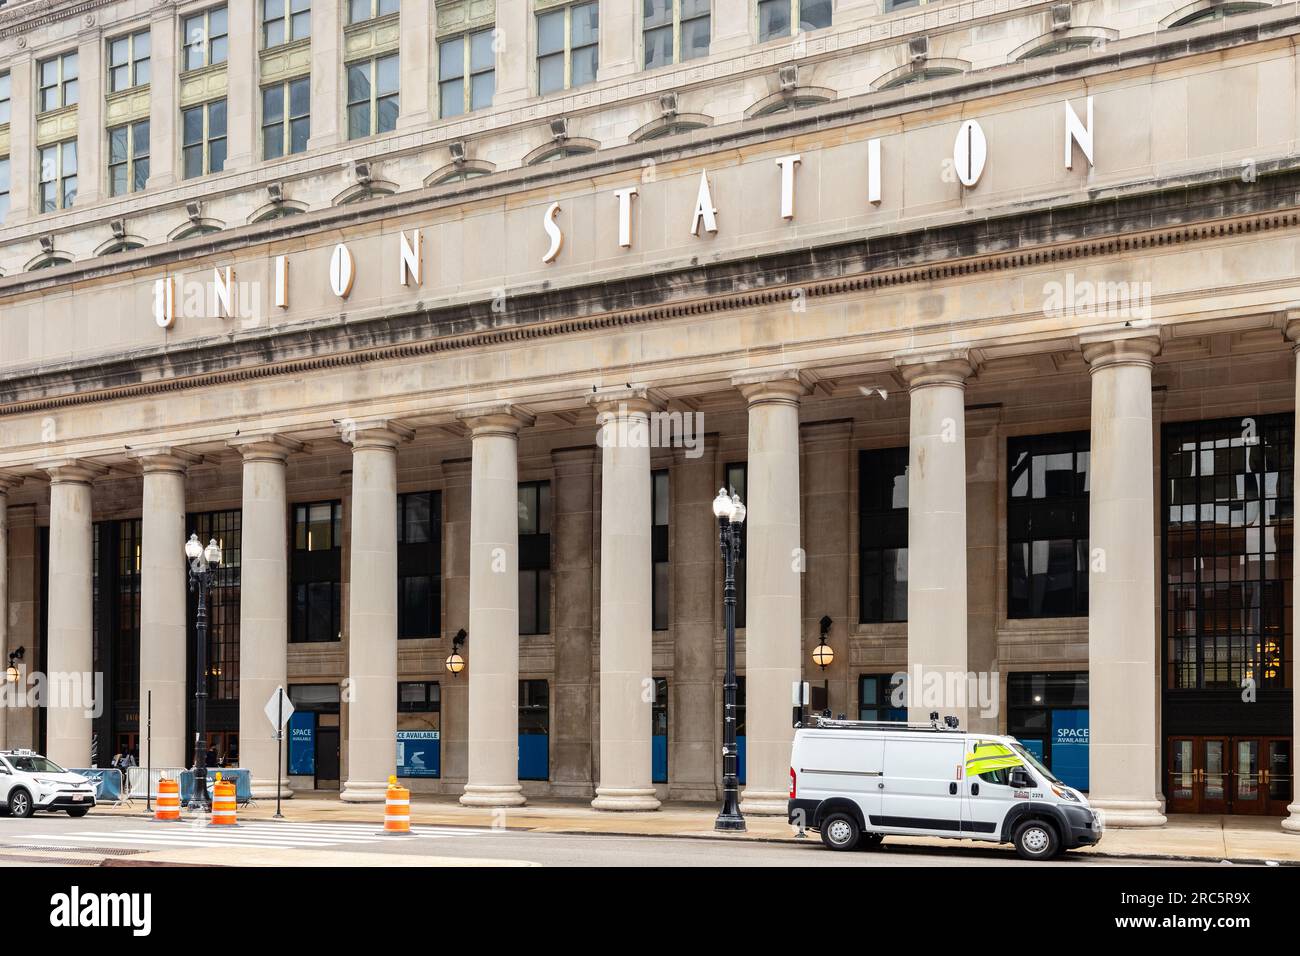 Union Station in downtown Chicago is a historic train station with shops, restaurants, and beautiful architecture. Stock Photo